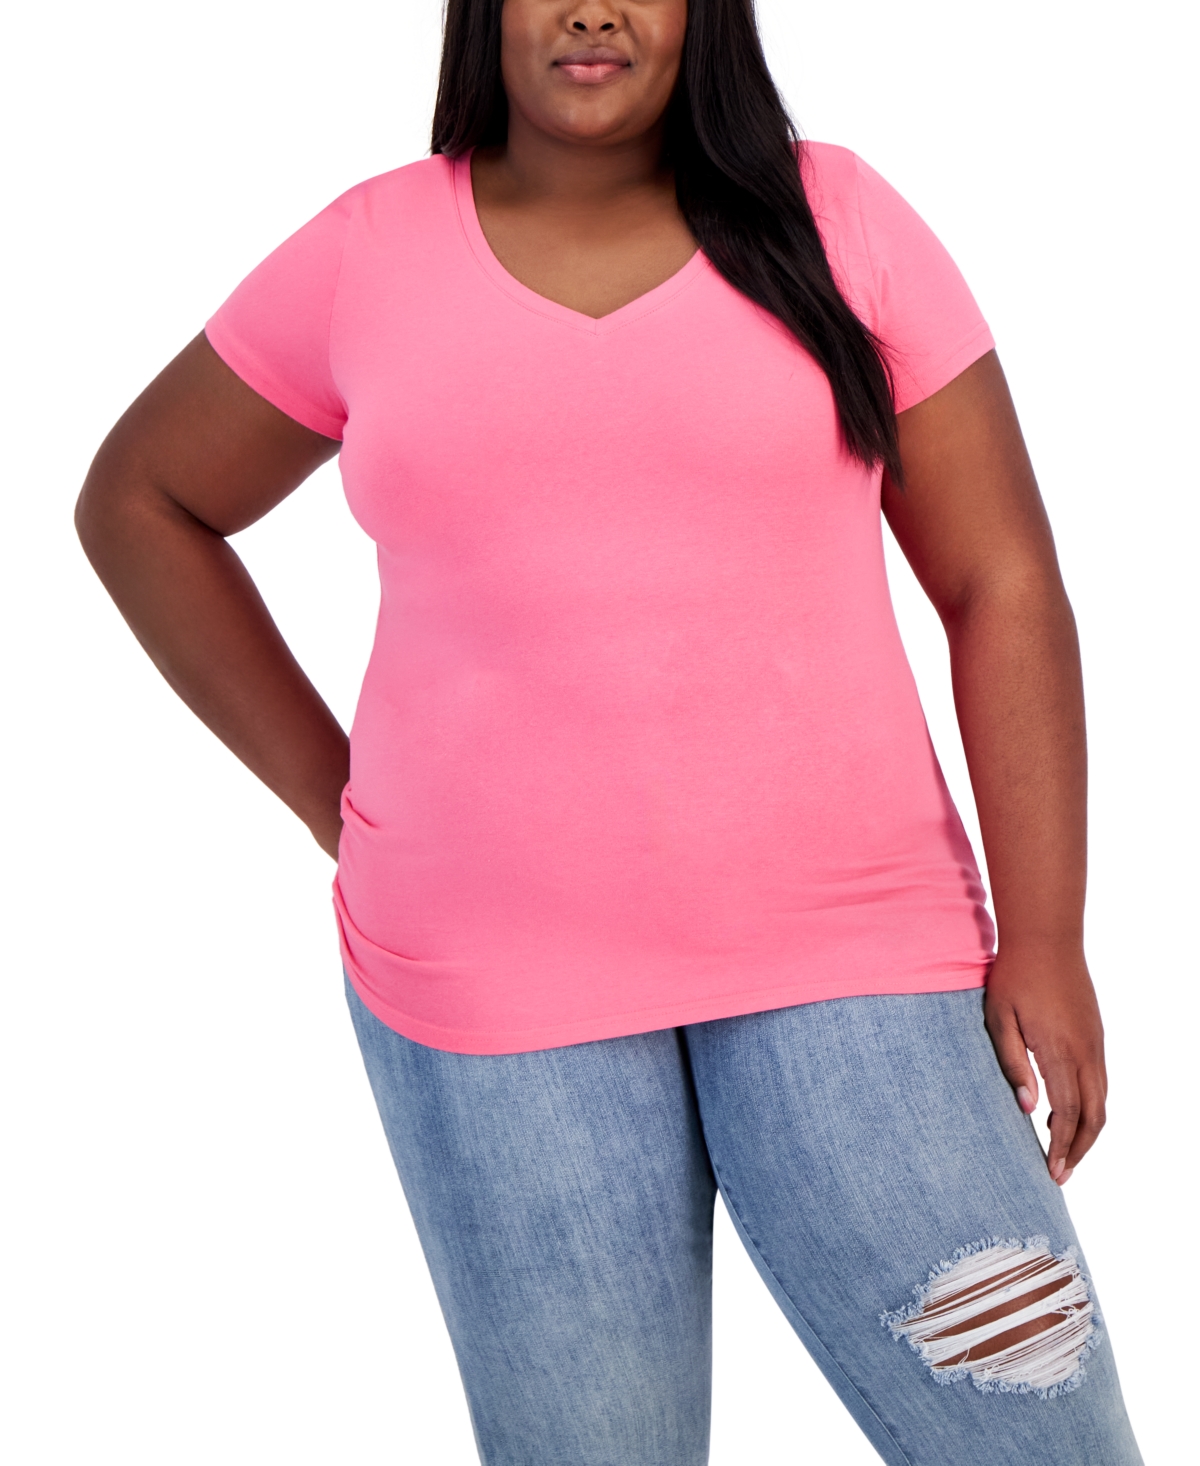 Aveto Trendy Plus Size Fitted V-neck T-shirt In Hot Pink